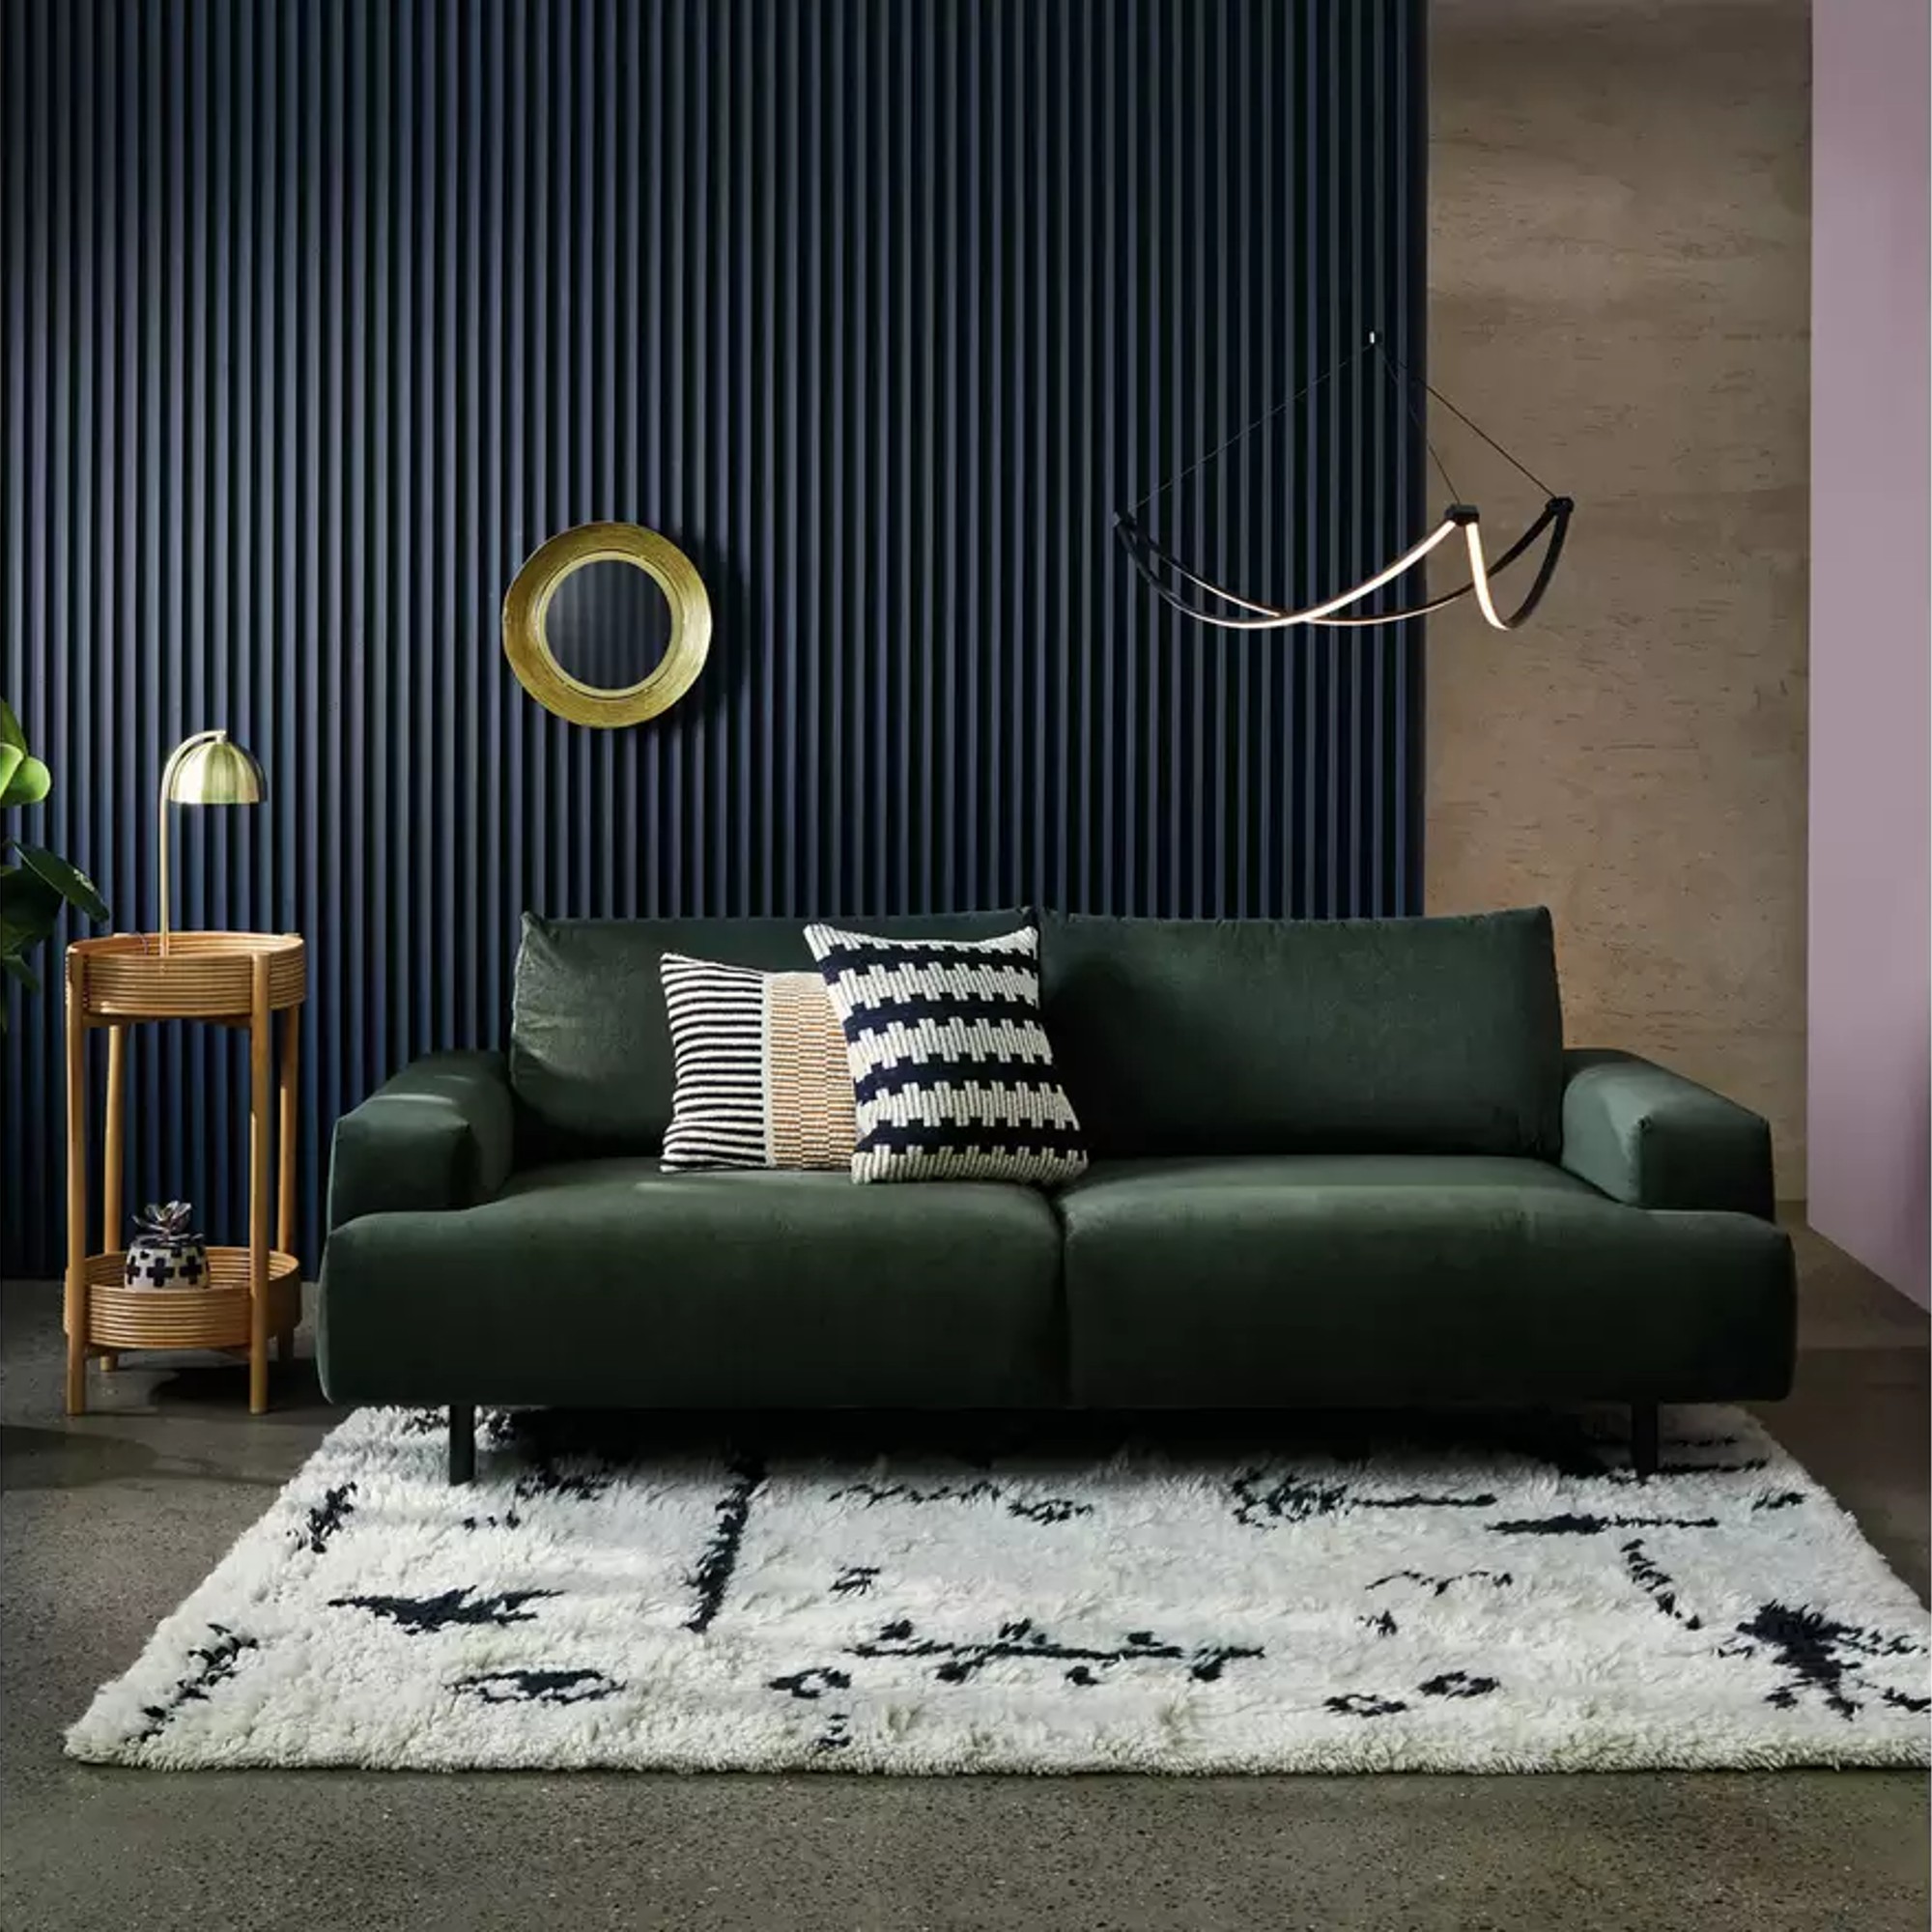 New Argos Sofa Deals Reduced Some Of Its Besters By 20 Ideal Home